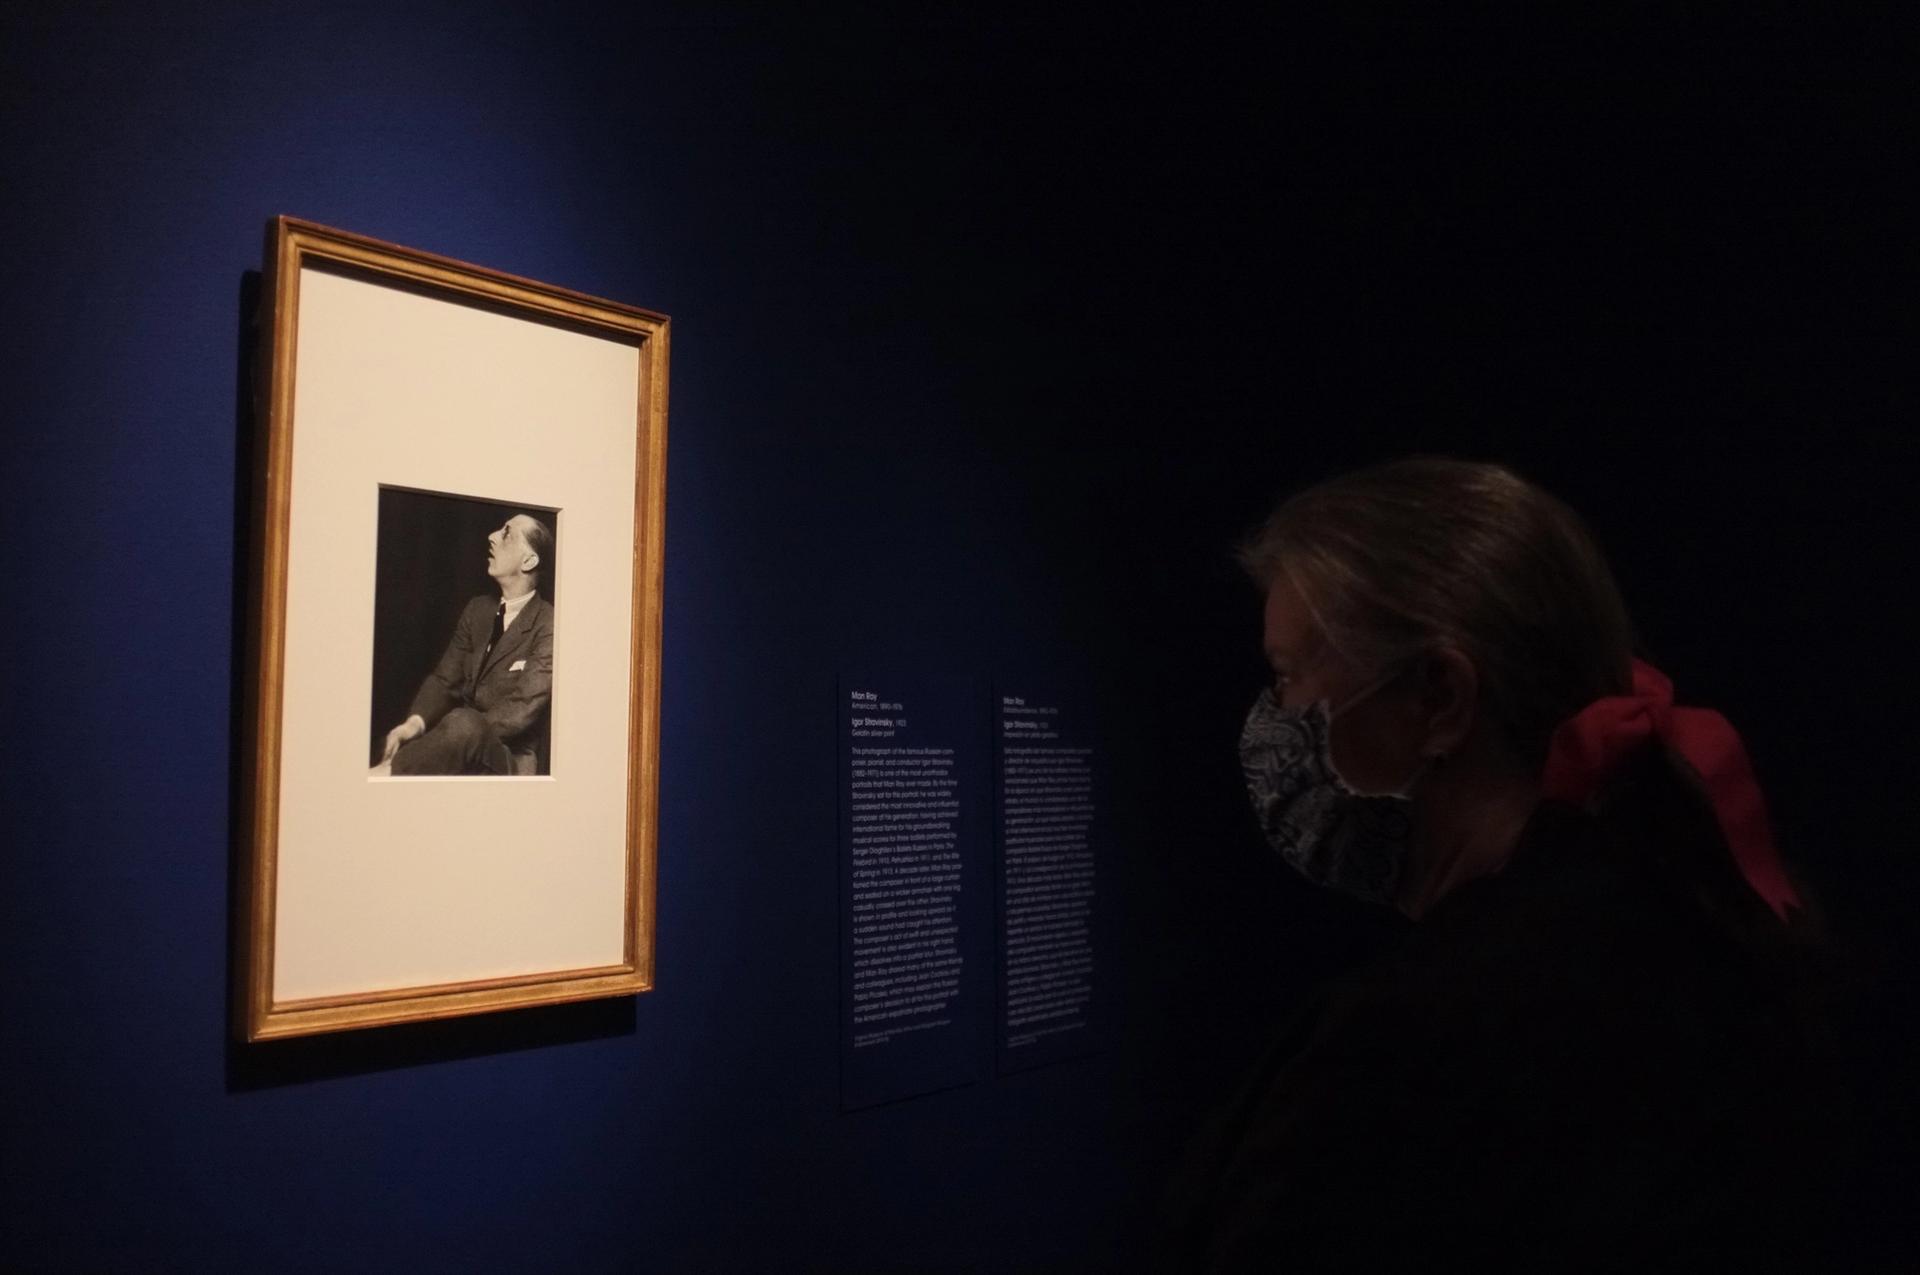 A visitor to the Man Ray exhibition at the Virgina Museum of Fine Art admires a portrait of Igor Stravisnky. Photo by Daniel Cassady